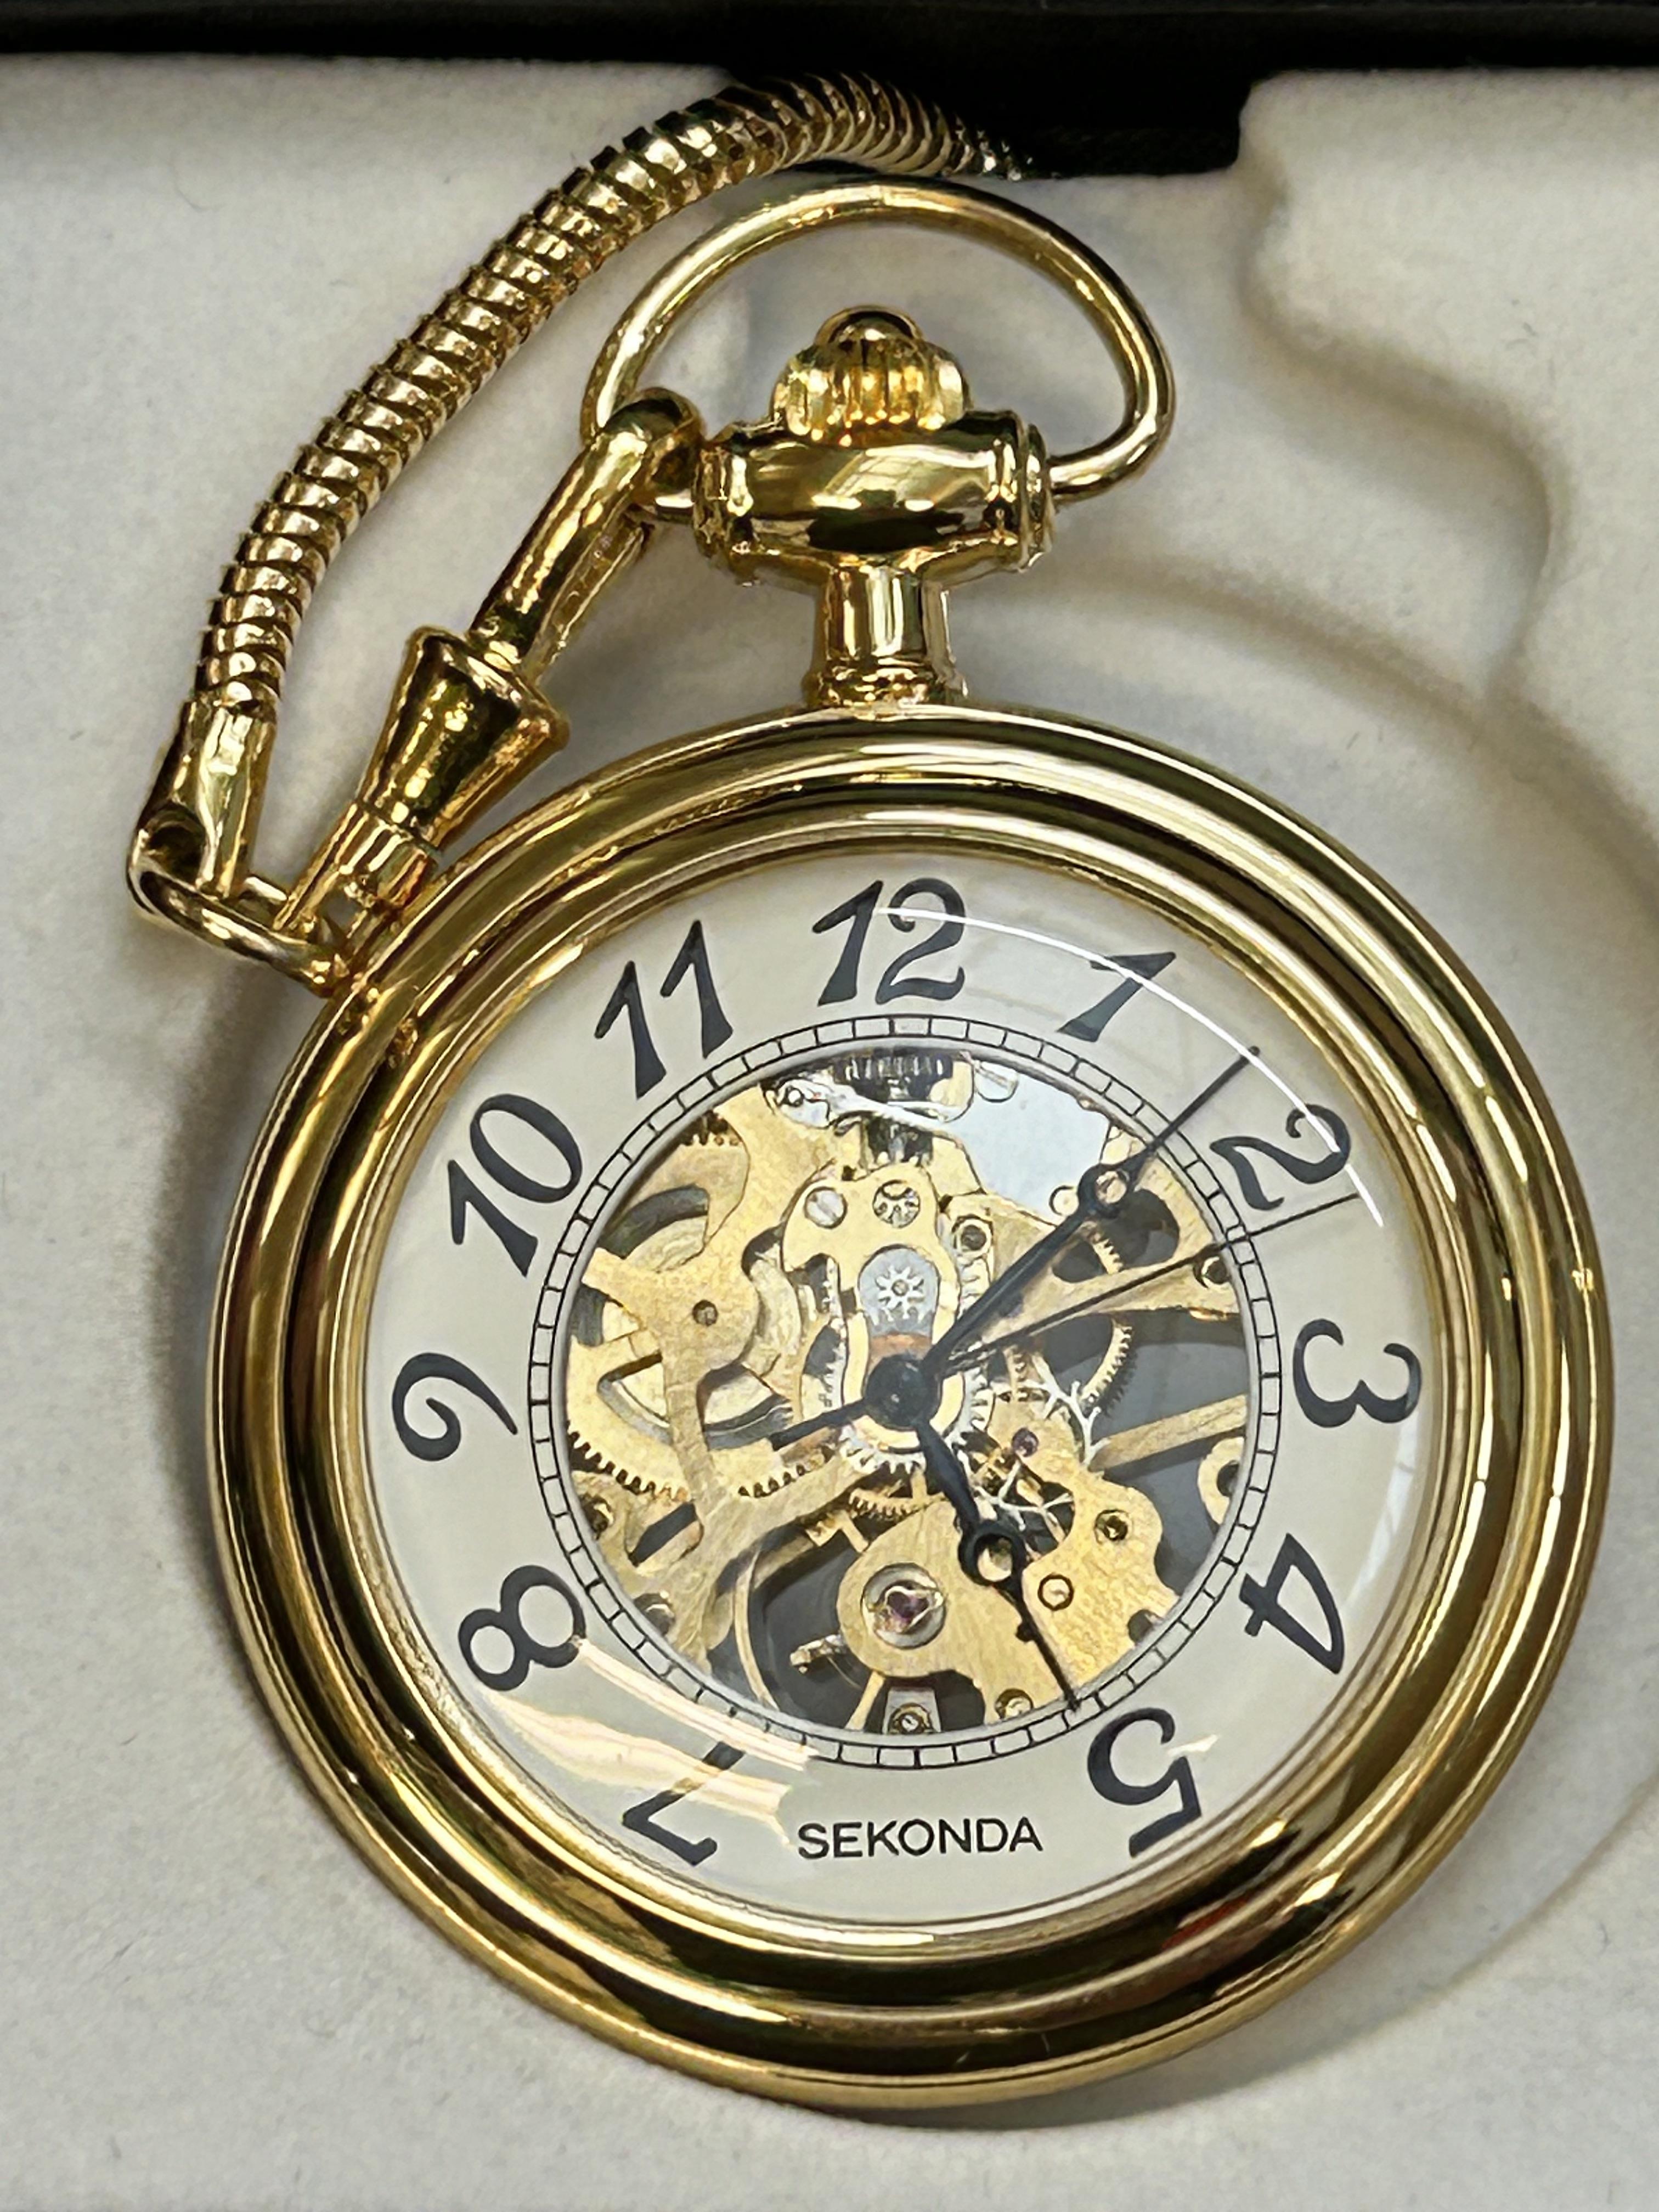 Sekonda pocket watch with skeleton dial, chain and